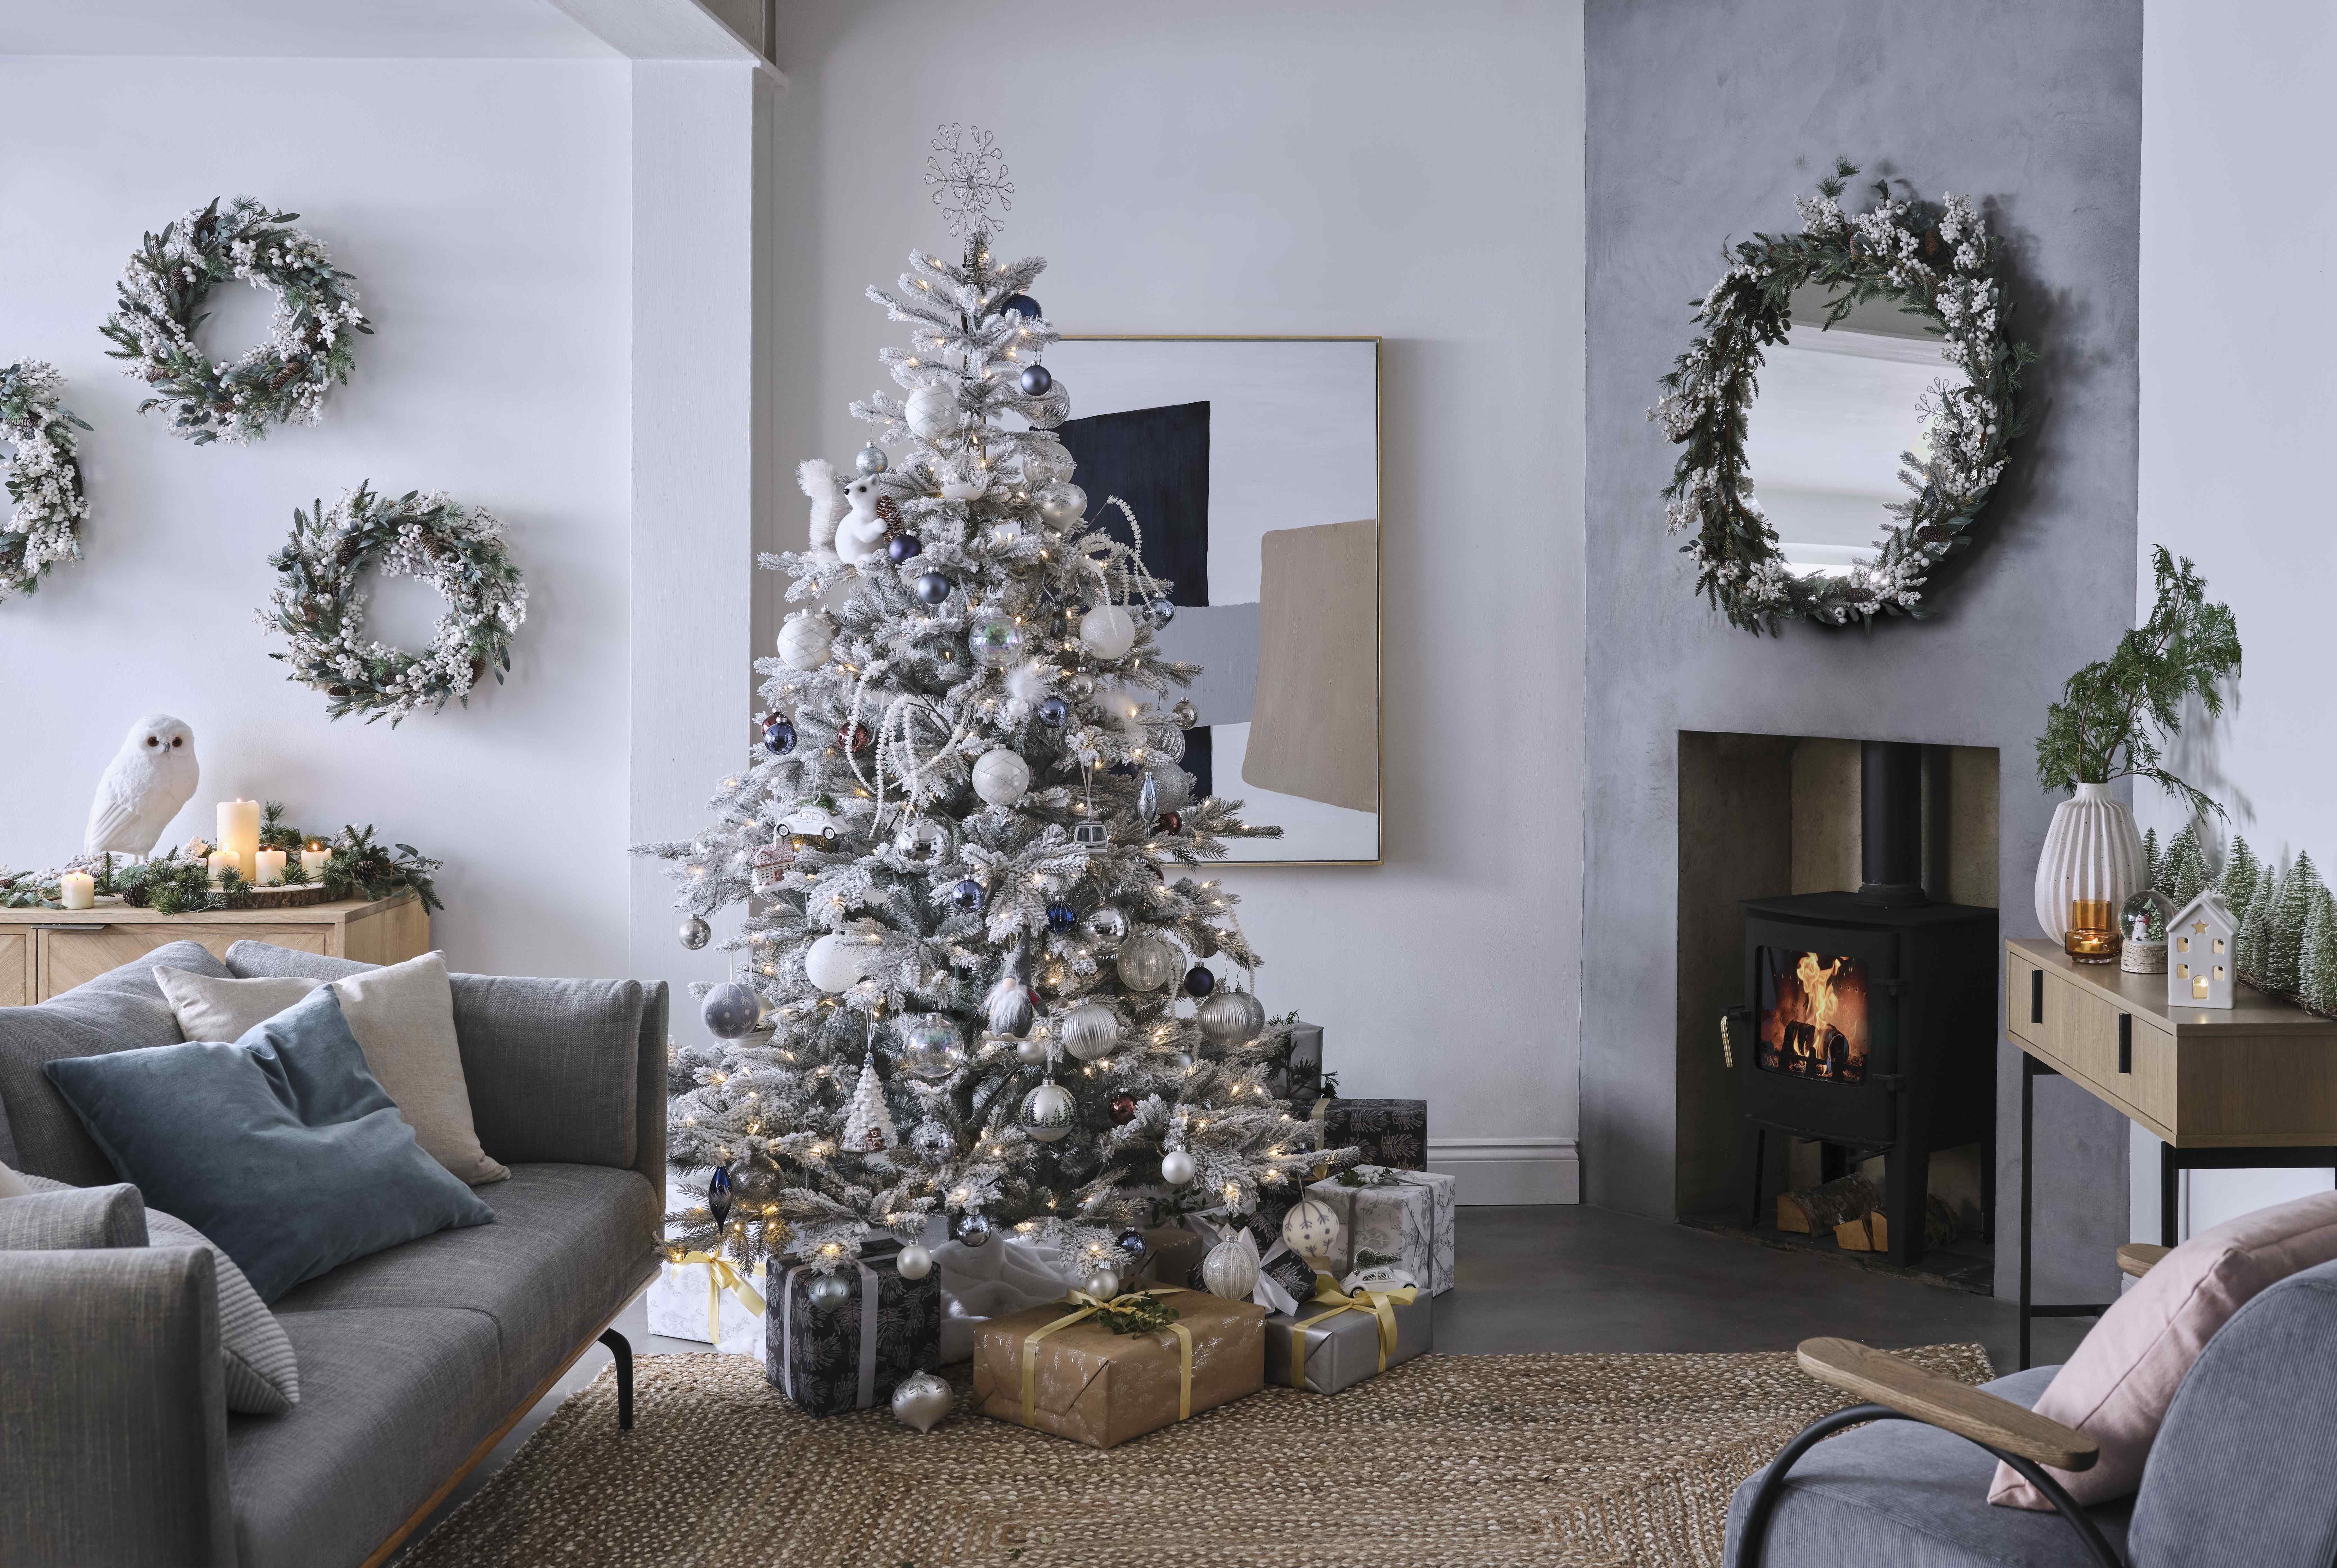 5 Things You Can Rent if You\'re Hosting This Christmas